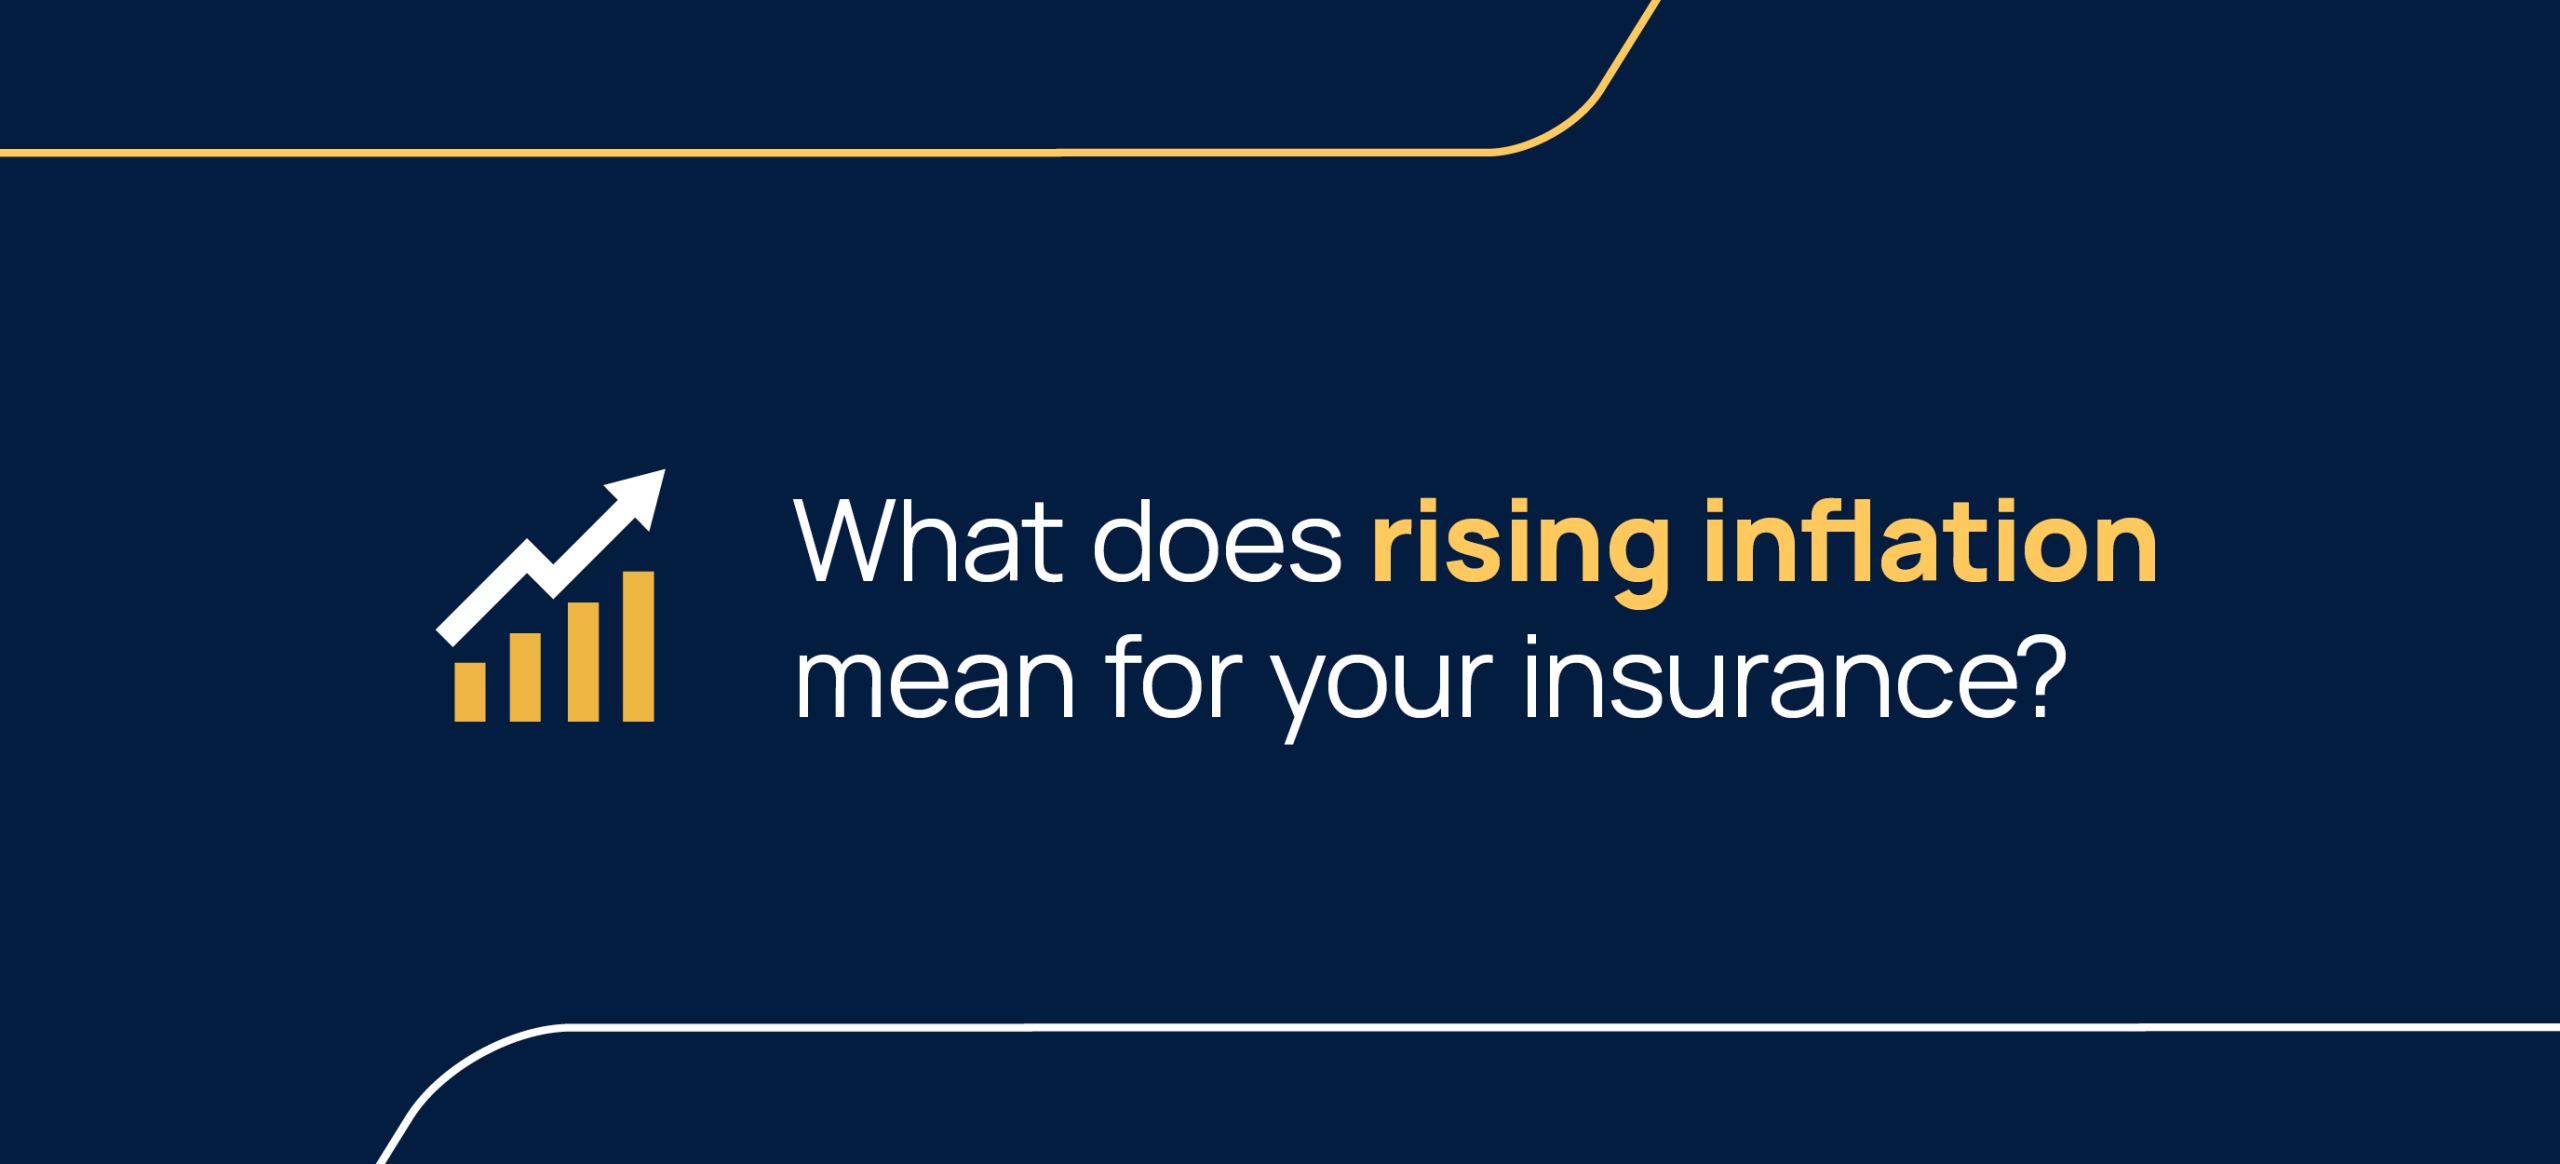 What does rising inflation mean for your insurance?